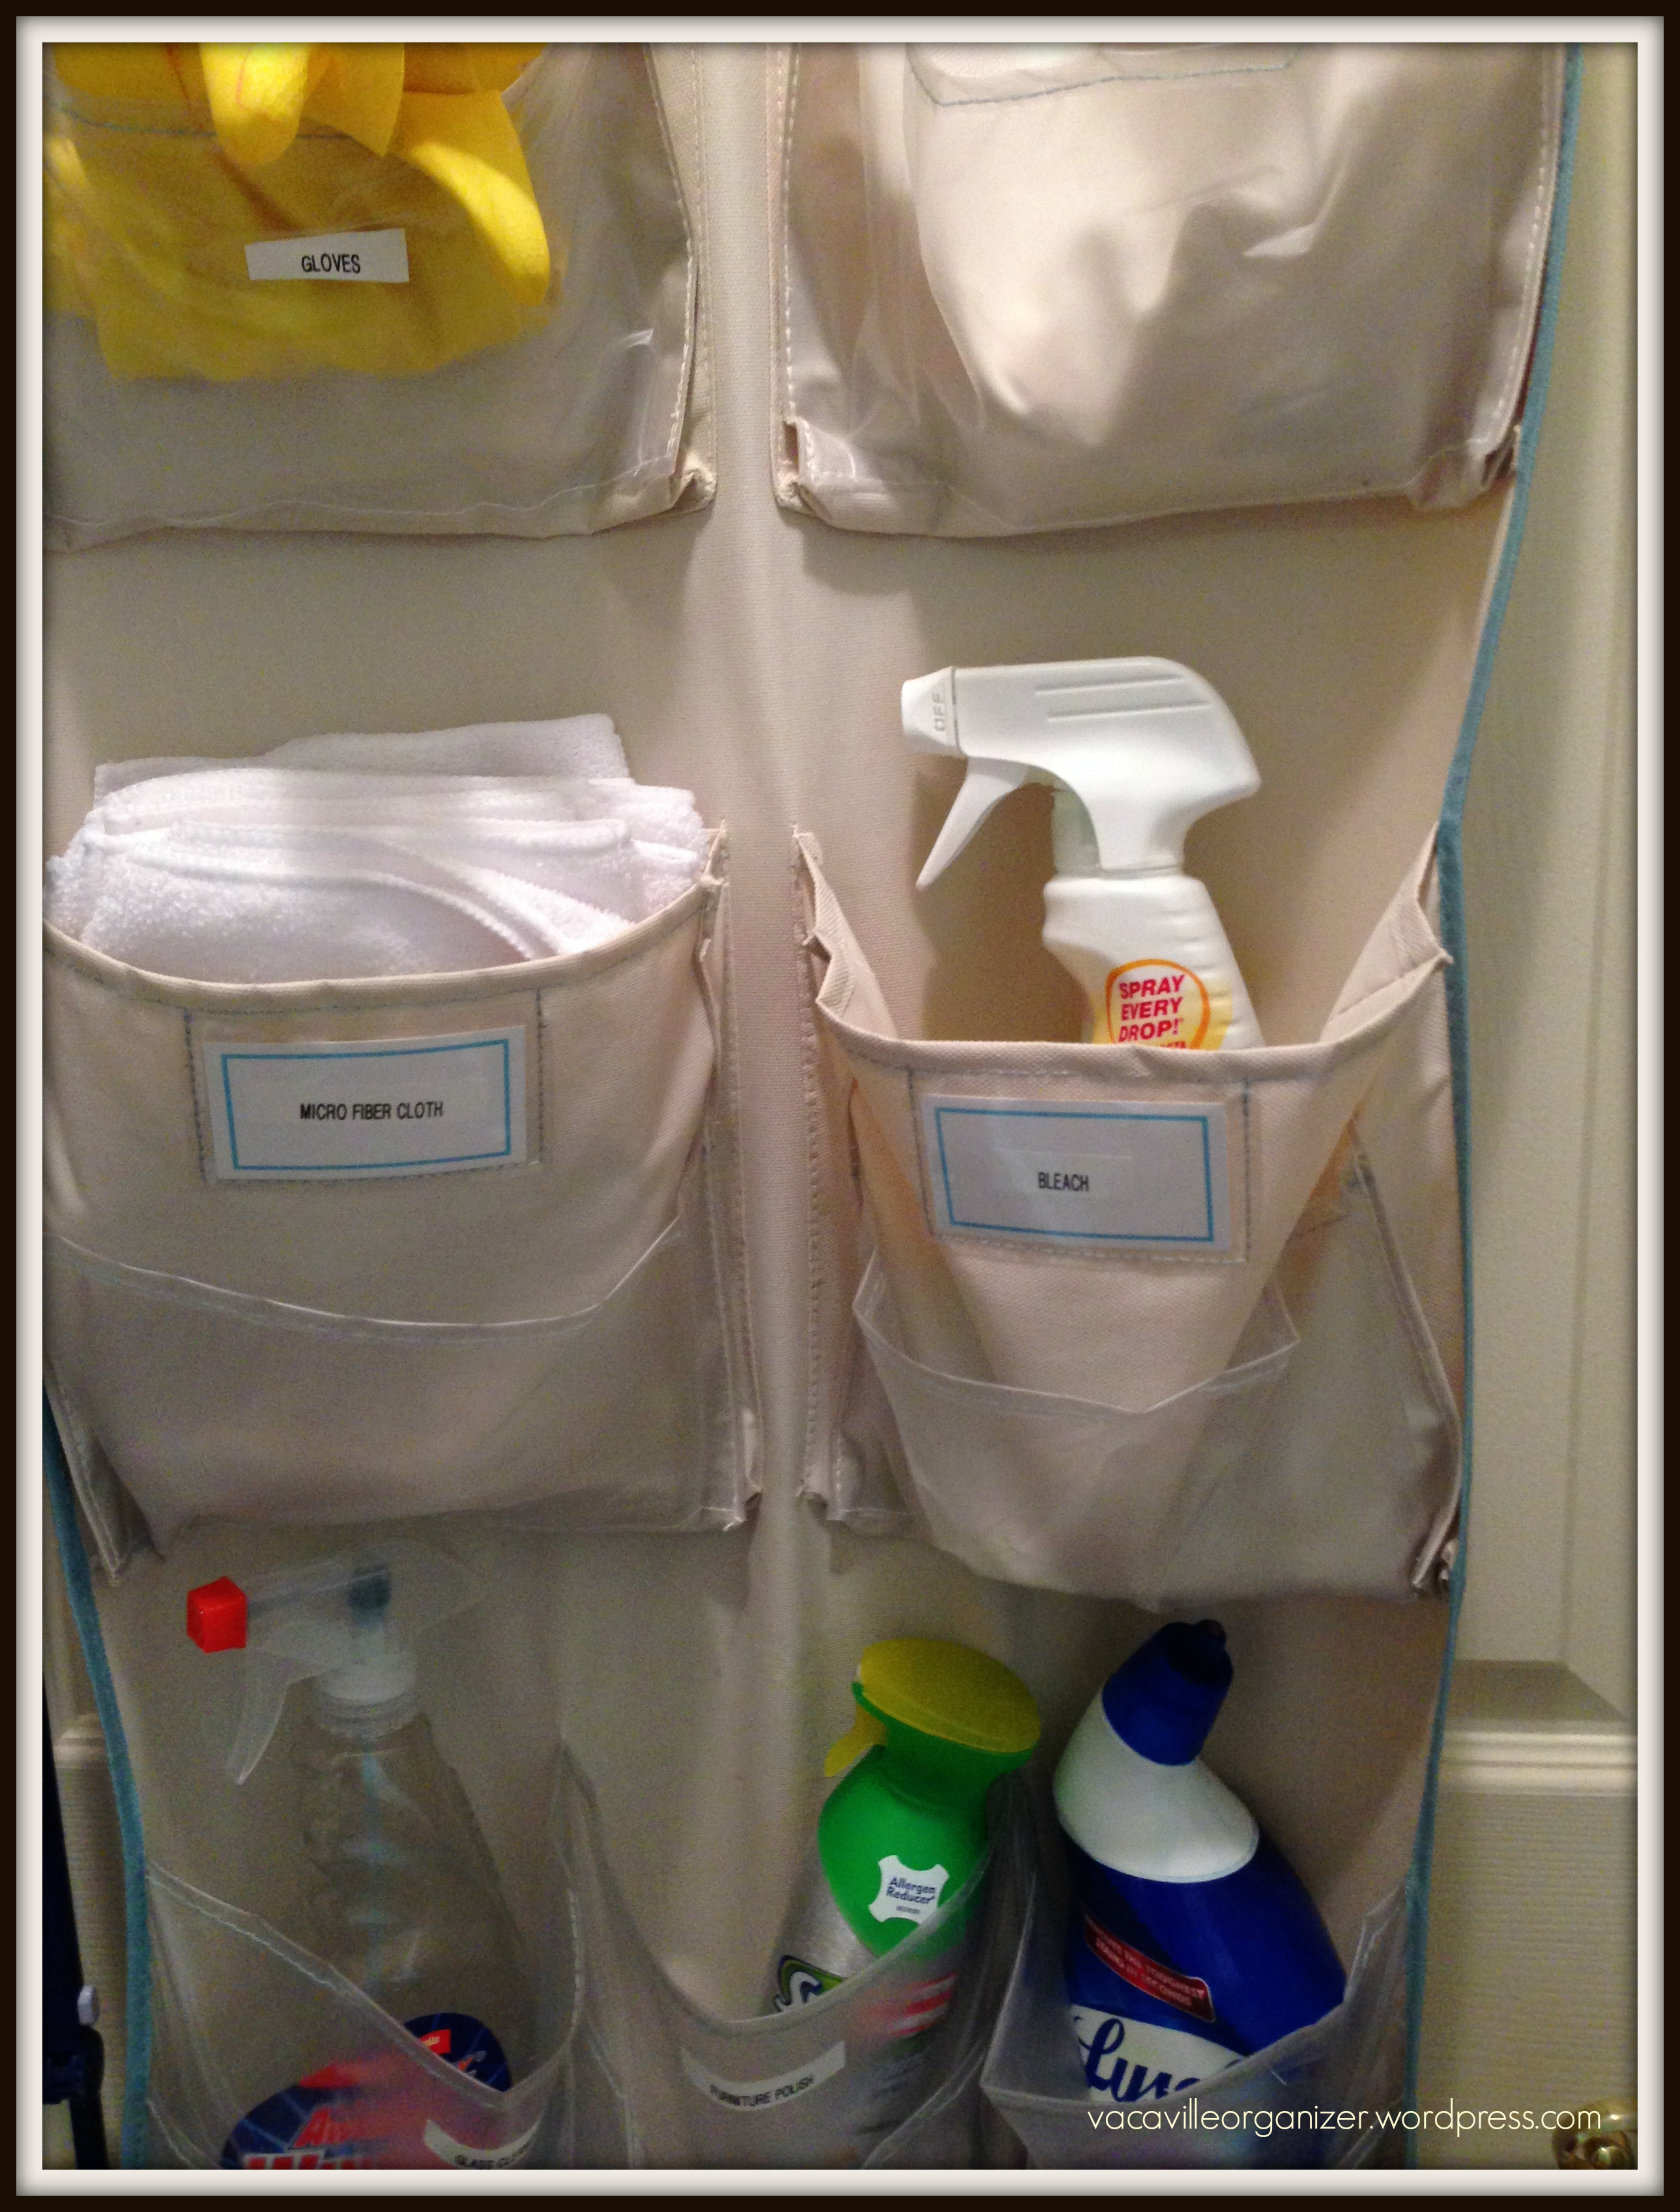 Top Dollar Store Organizing Products - I'm an Organizing Junkie